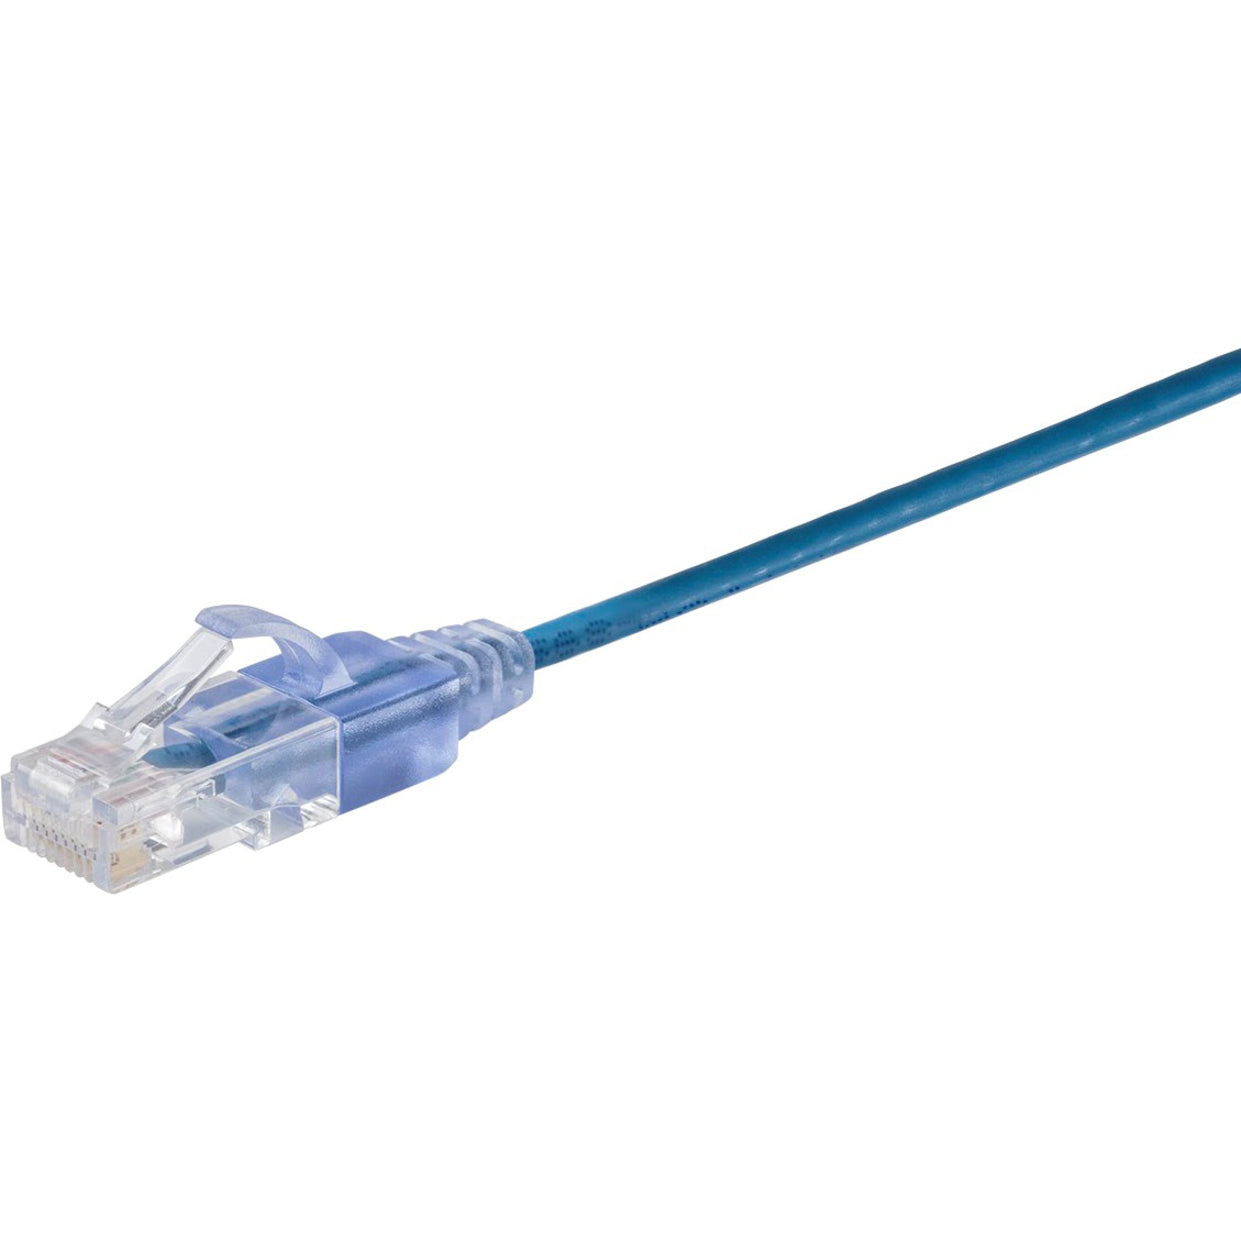 Monoprice 15154 SlimRun Cat6A Ethernet Network Patch Cable 3ft Blue, 10-Pack